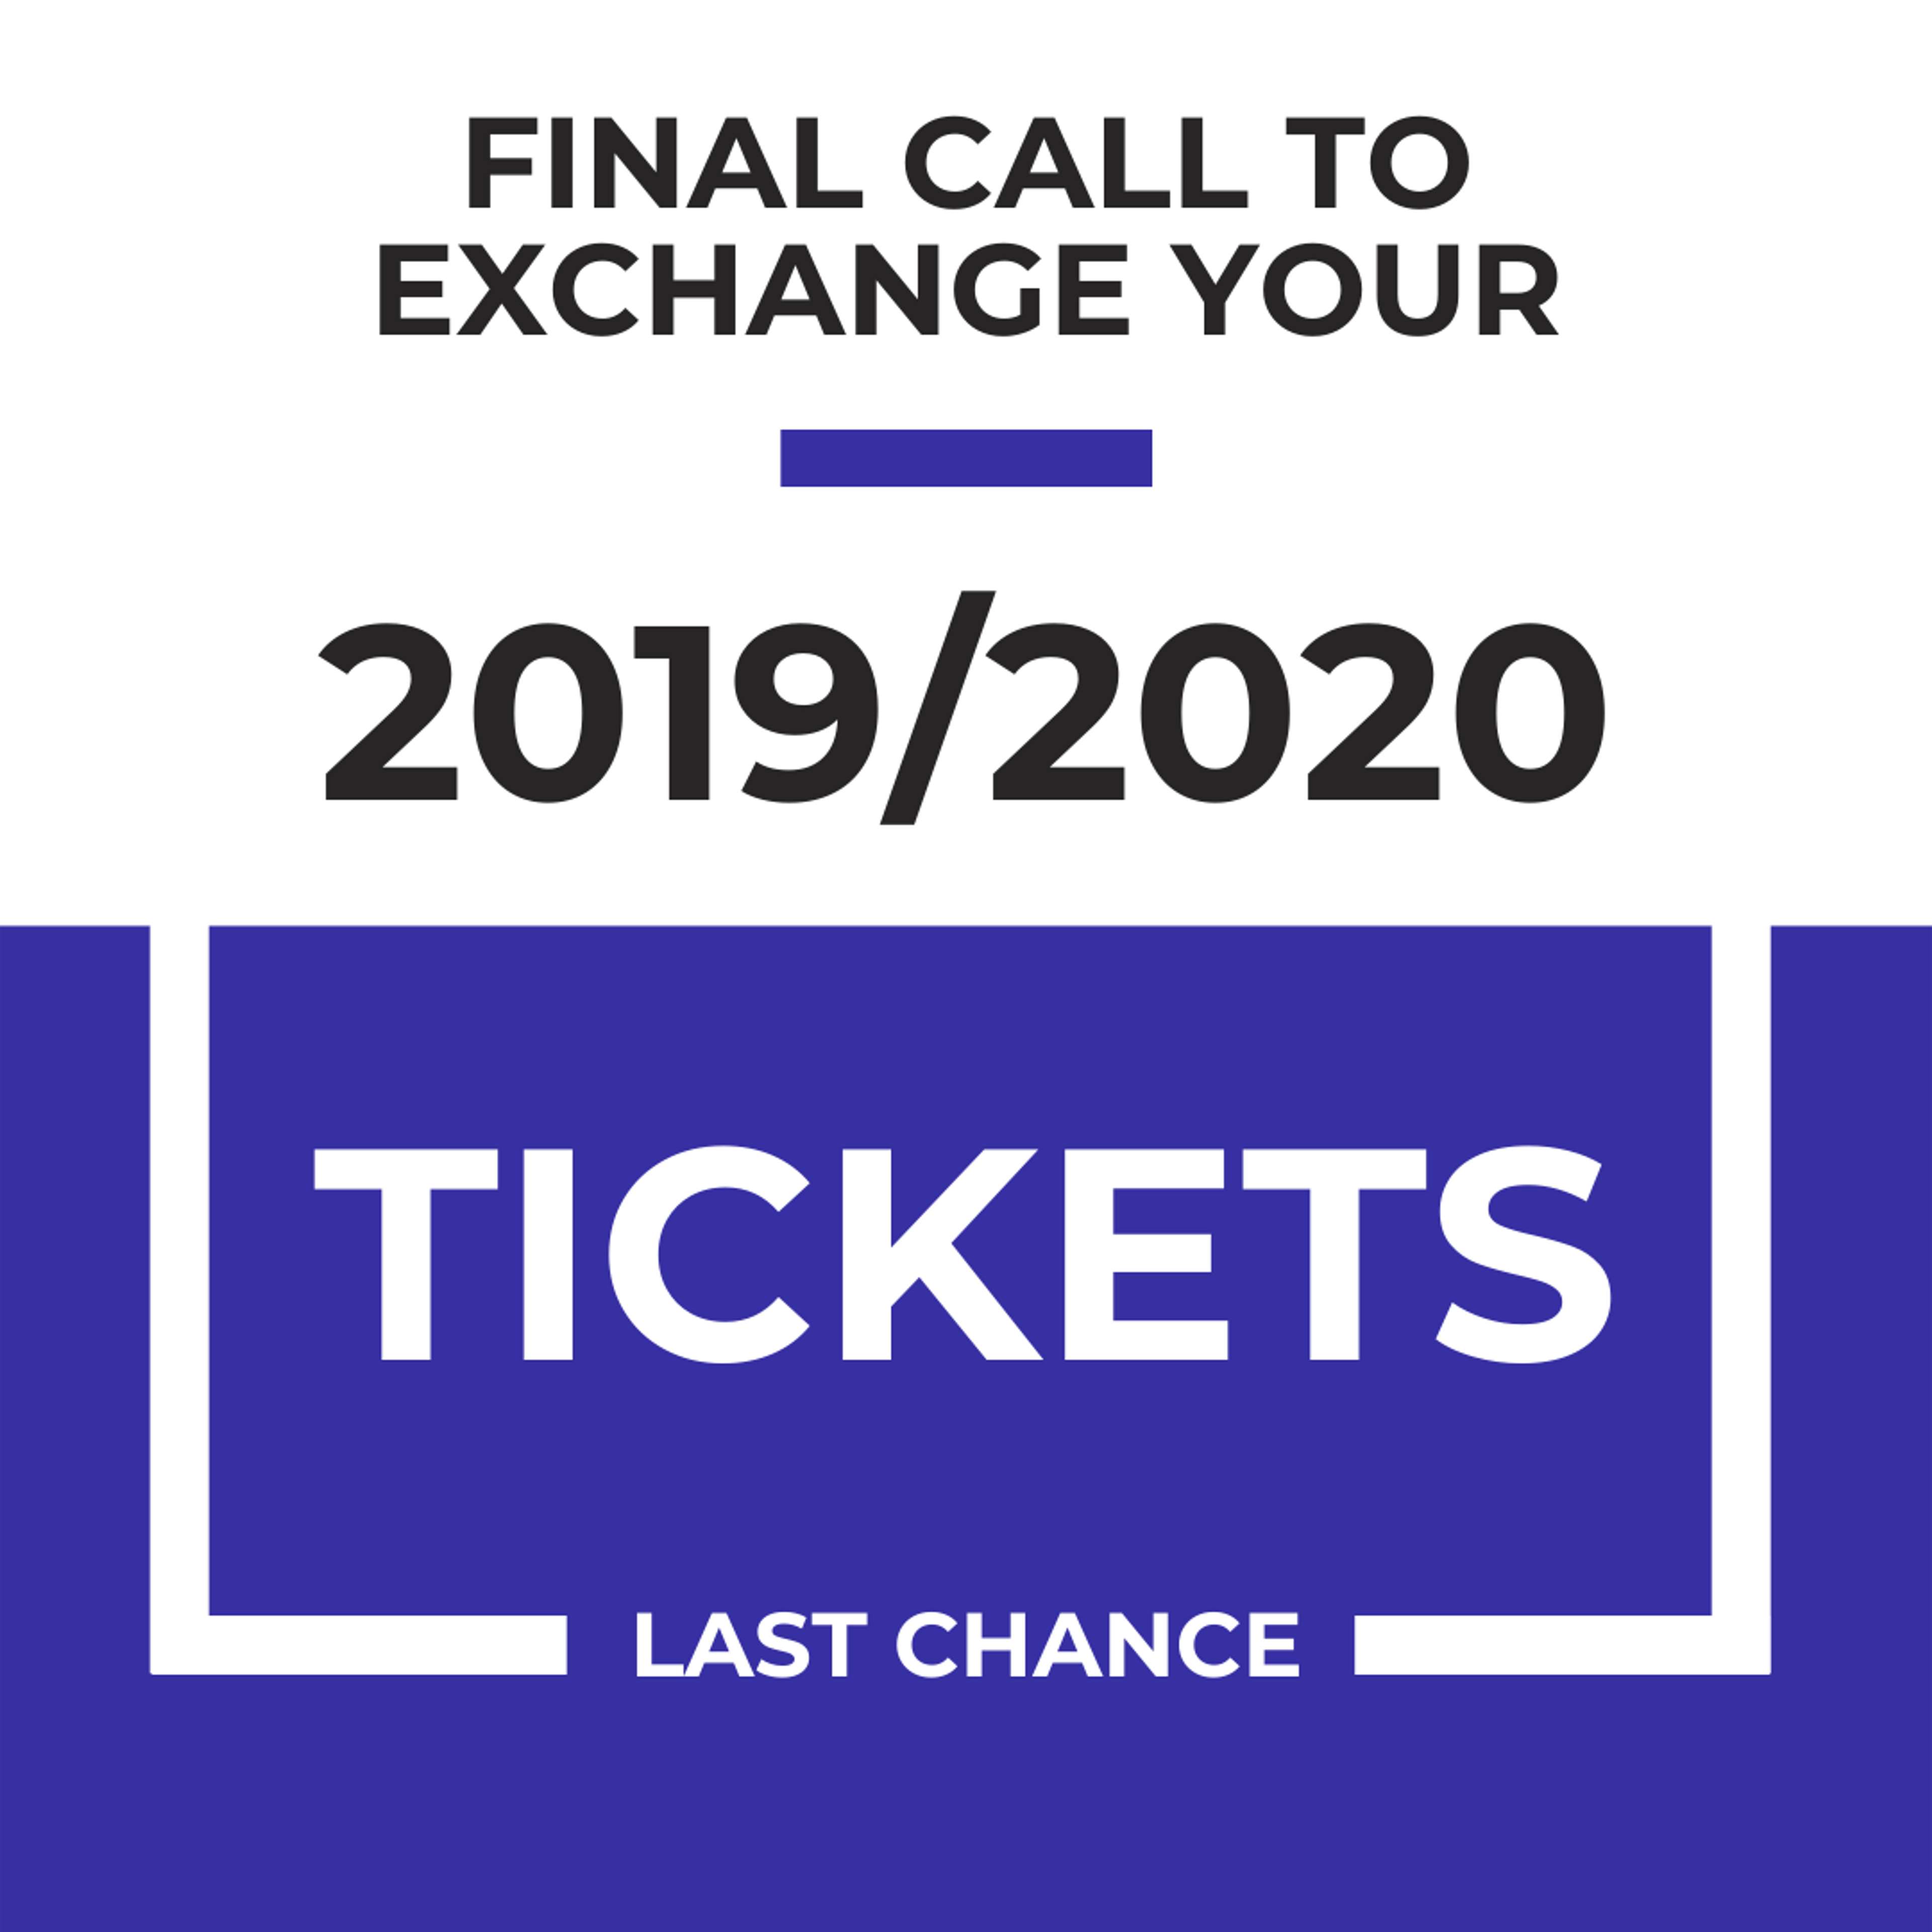 Final Call To Exchange your 2019/2020 tickets